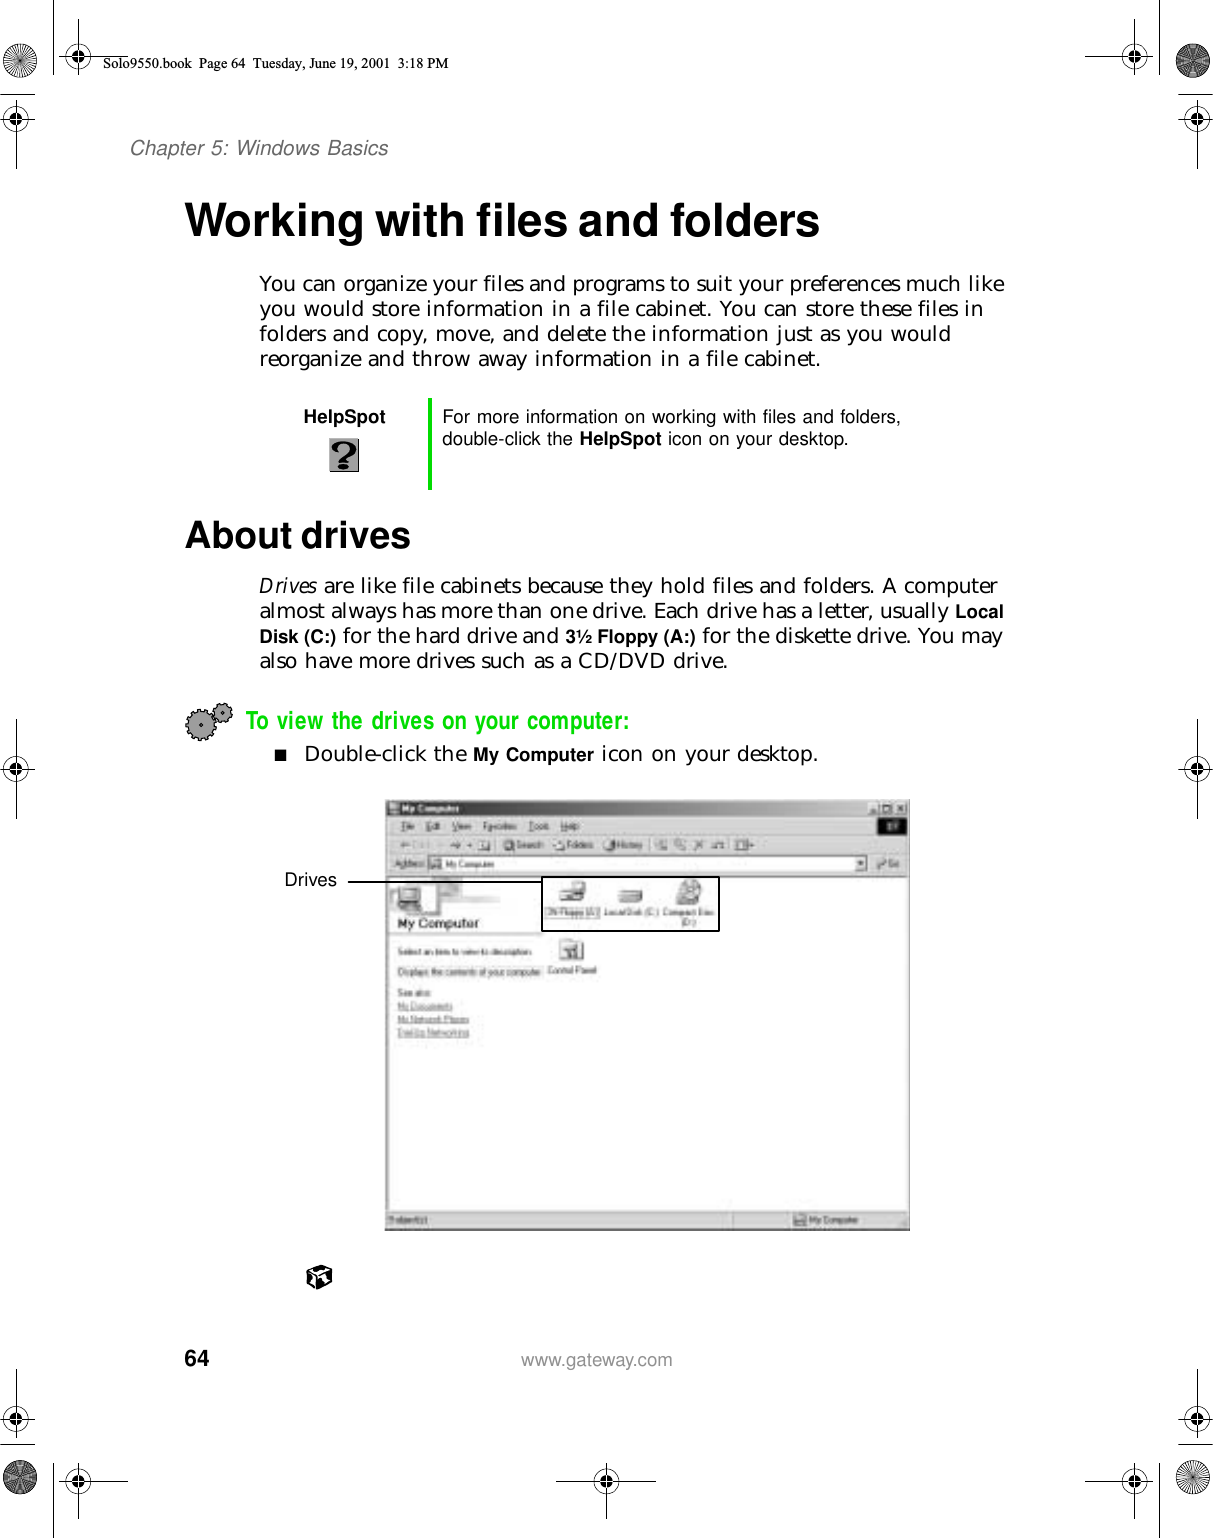 64Chapter 5: Windows Basicswww.gateway.comWorking with files and foldersYou can organize your files and programs to suit your preferences much like you would store information in a file cabinet. You can store these files in folders and copy, move, and delete the information just as you would reorganize and throw away information in a file cabinet.About drivesDrives are like file cabinets because they hold files and folders. A computer almost always has more than one drive. Each drive has a letter, usually Local Disk (C:) for the hard drive and 3½ Floppy (A:) for the diskette drive. You may also have more drives such as a CD/DVD drive.To view the drives on your computer: ■Double-click the My Computer icon on your desktop.HelpSpot For more information on working with files and folders, double-click the HelpSpot icon on your desktop.DrivesSolo9550.book Page 64 Tuesday, June 19, 2001 3:18 PM